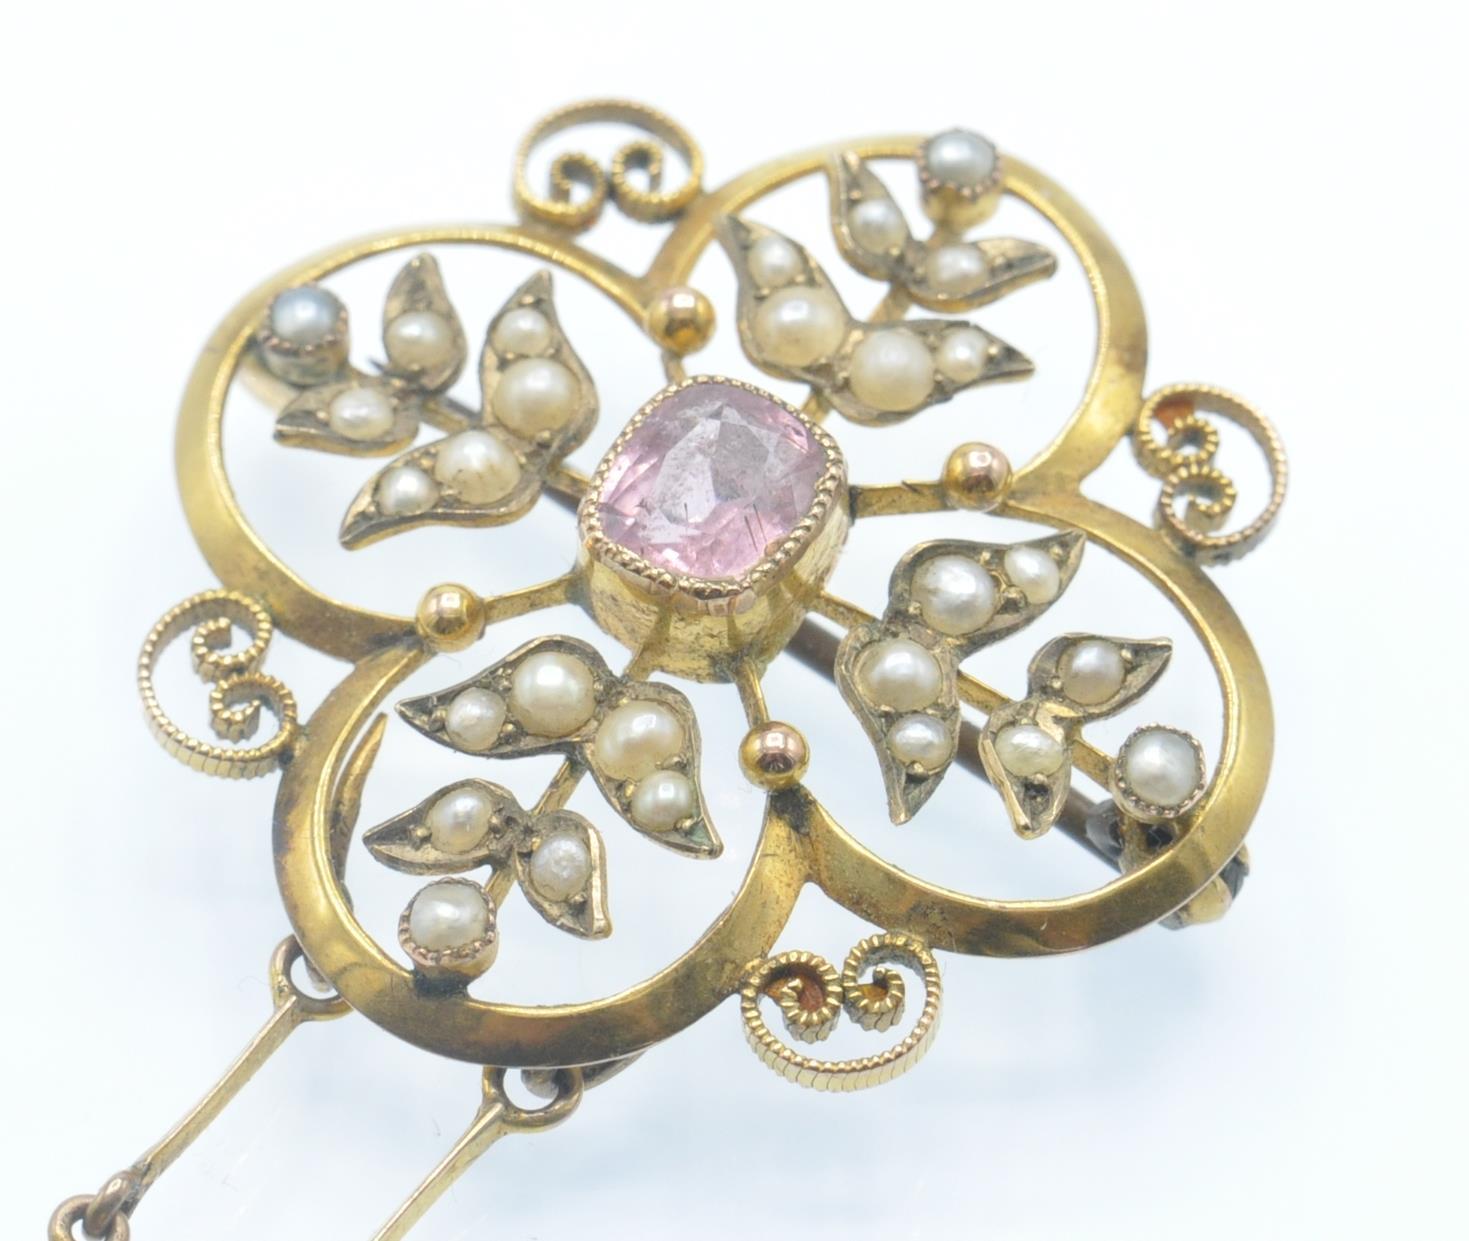 An Antique 9ct Gold Tourmaline & Seed Pearl Pendant Brooch - Image 2 of 4